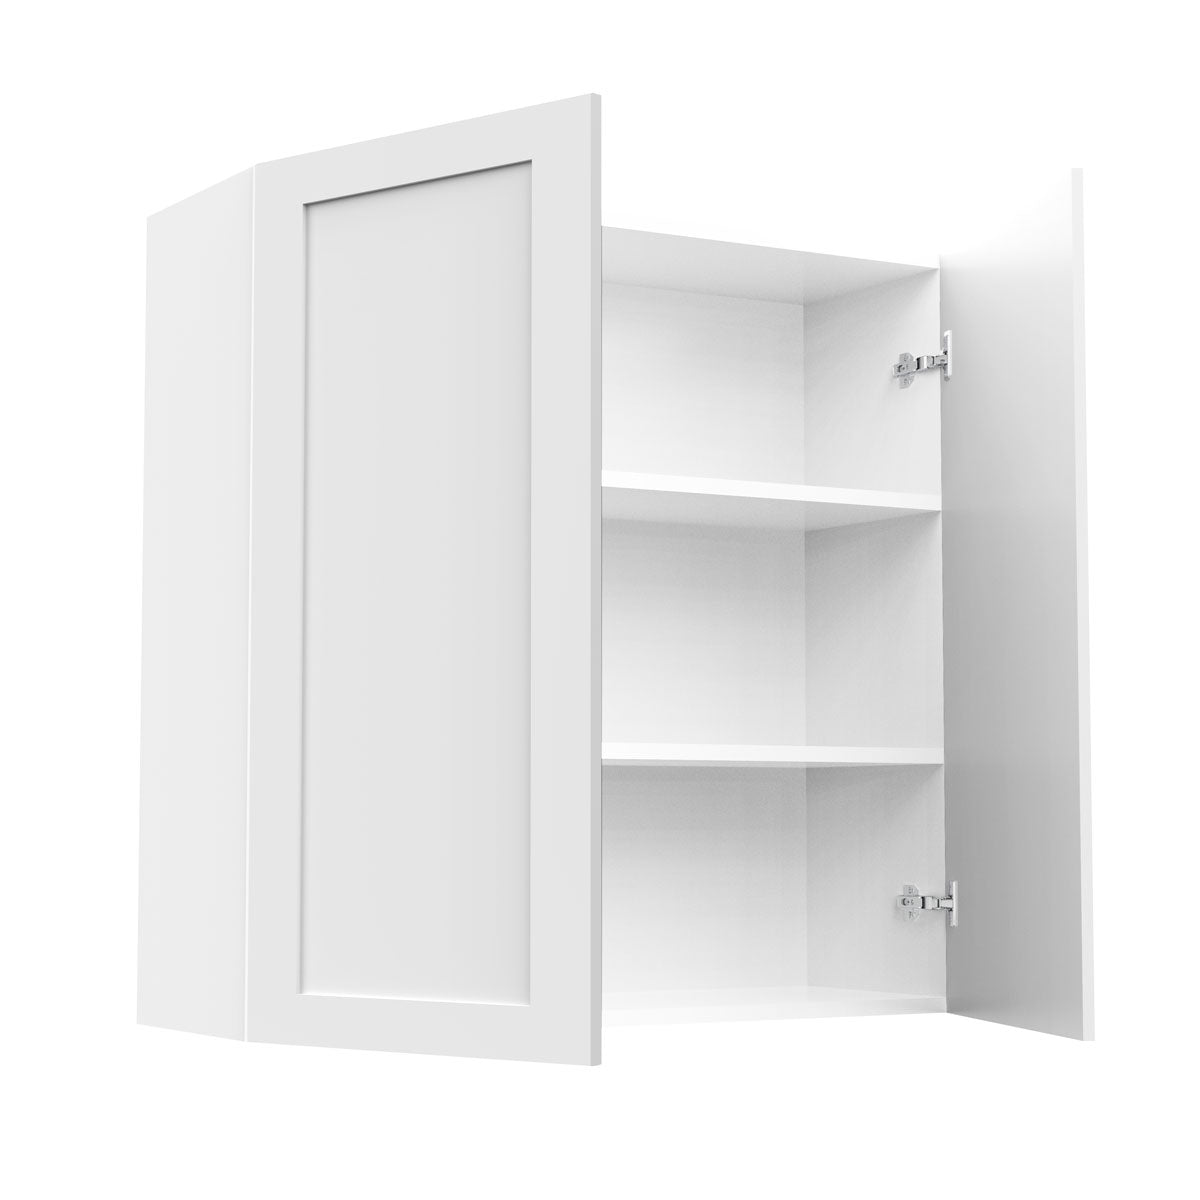 RTA - White Shaker - Double Door Wall Cabinets | 36"W x 36"H x 12"D